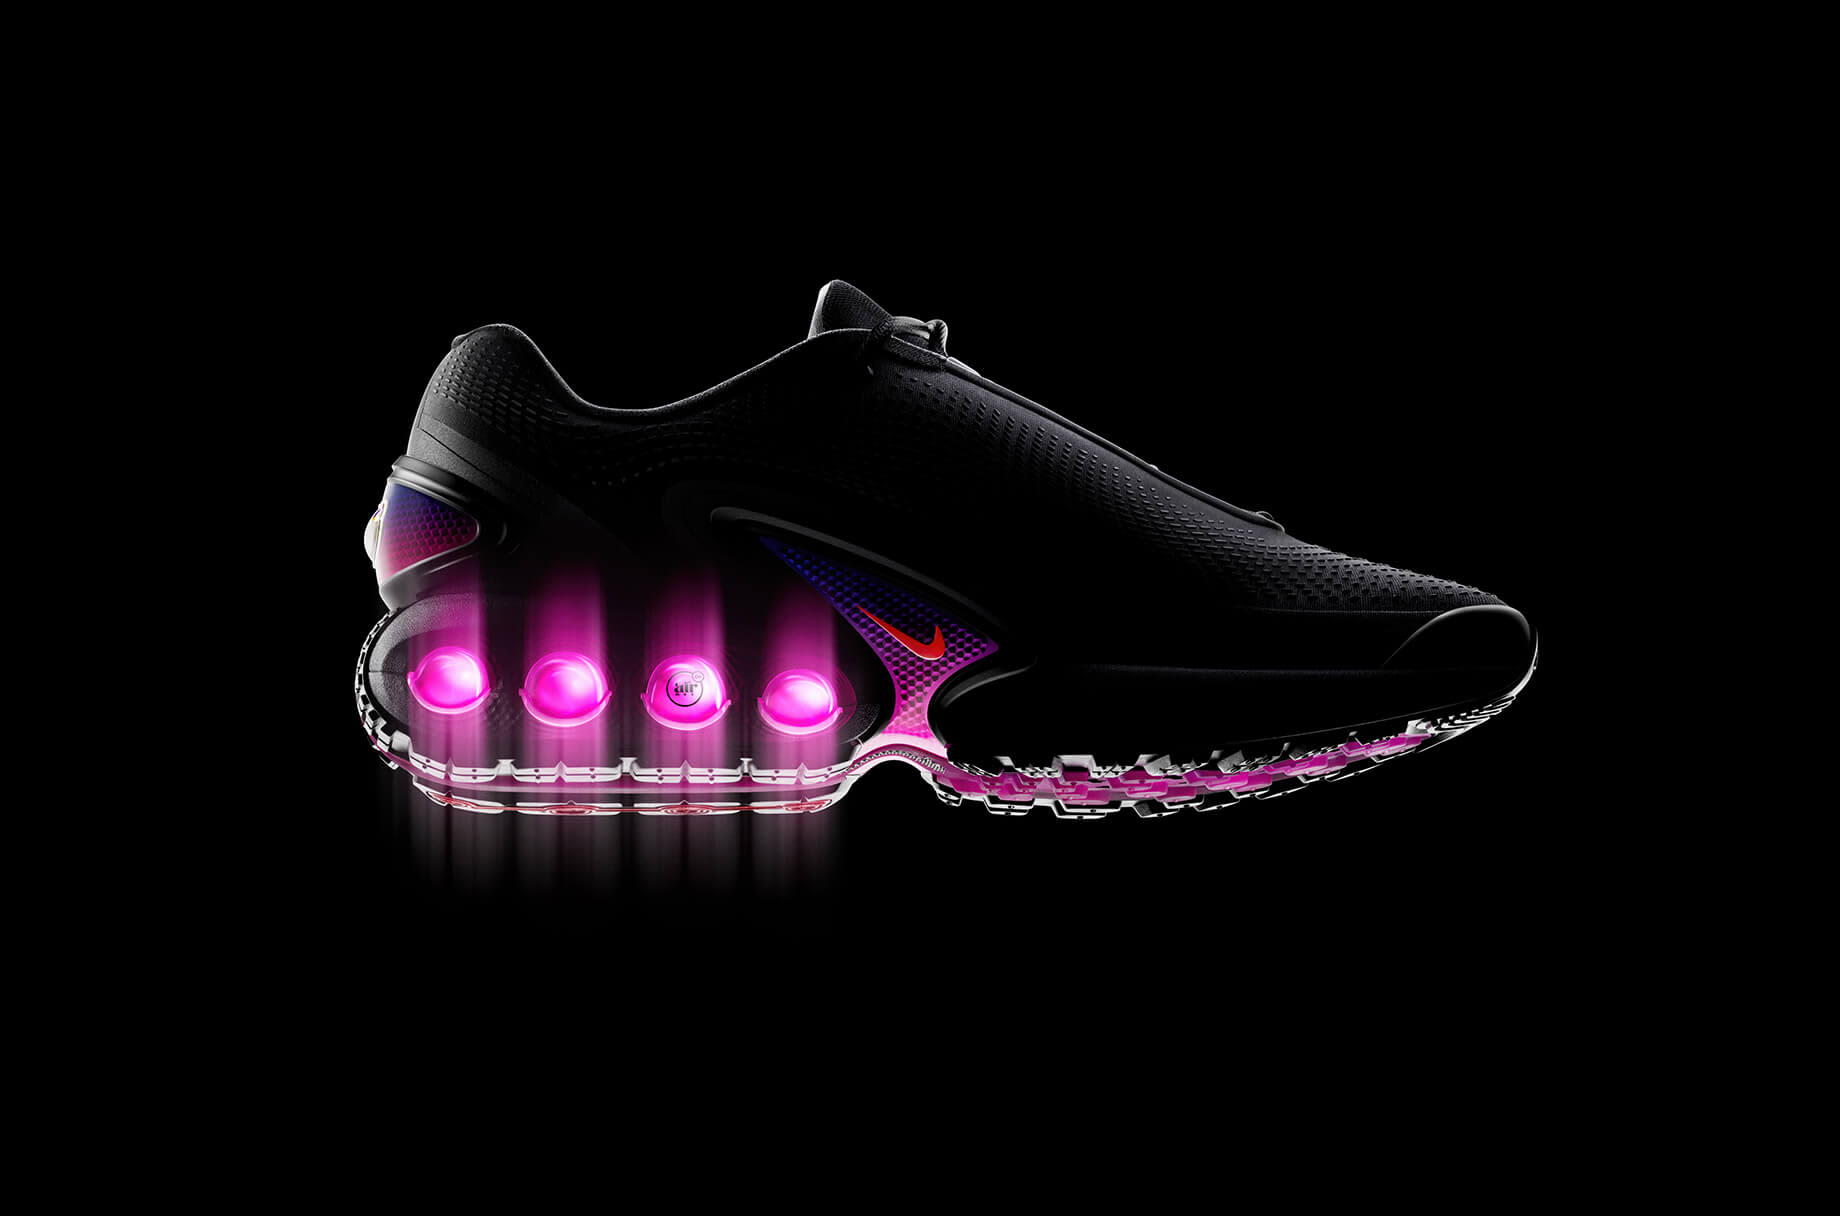 Nike Debuts Groundbreaking Technology With Launch of Air Max Dn Shoe 